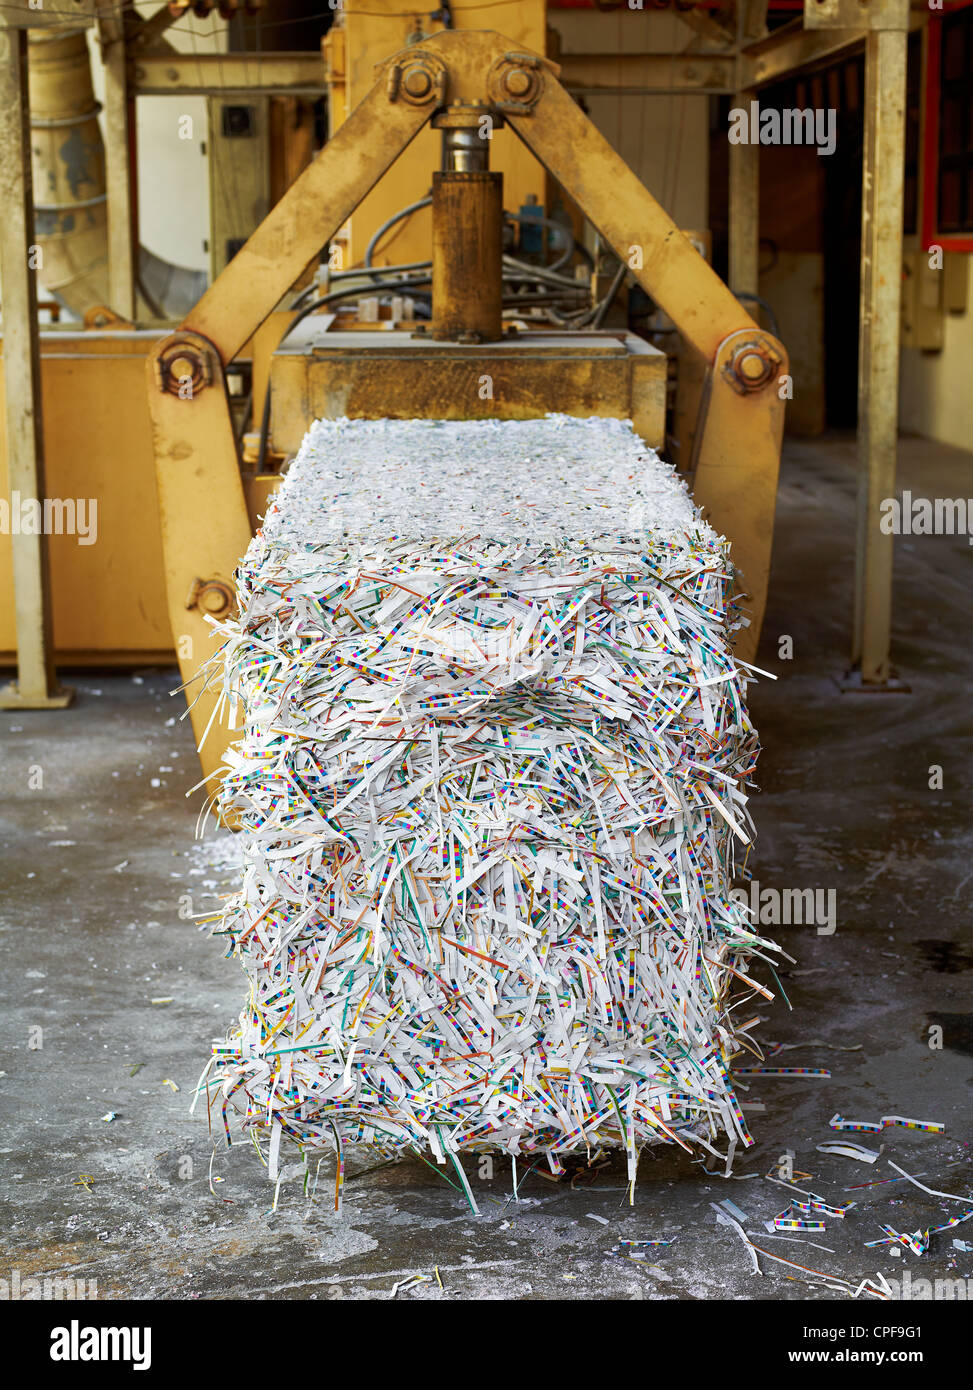 Recycled paper and waste from a printing press in Johor, Malaysia. Stock Photo